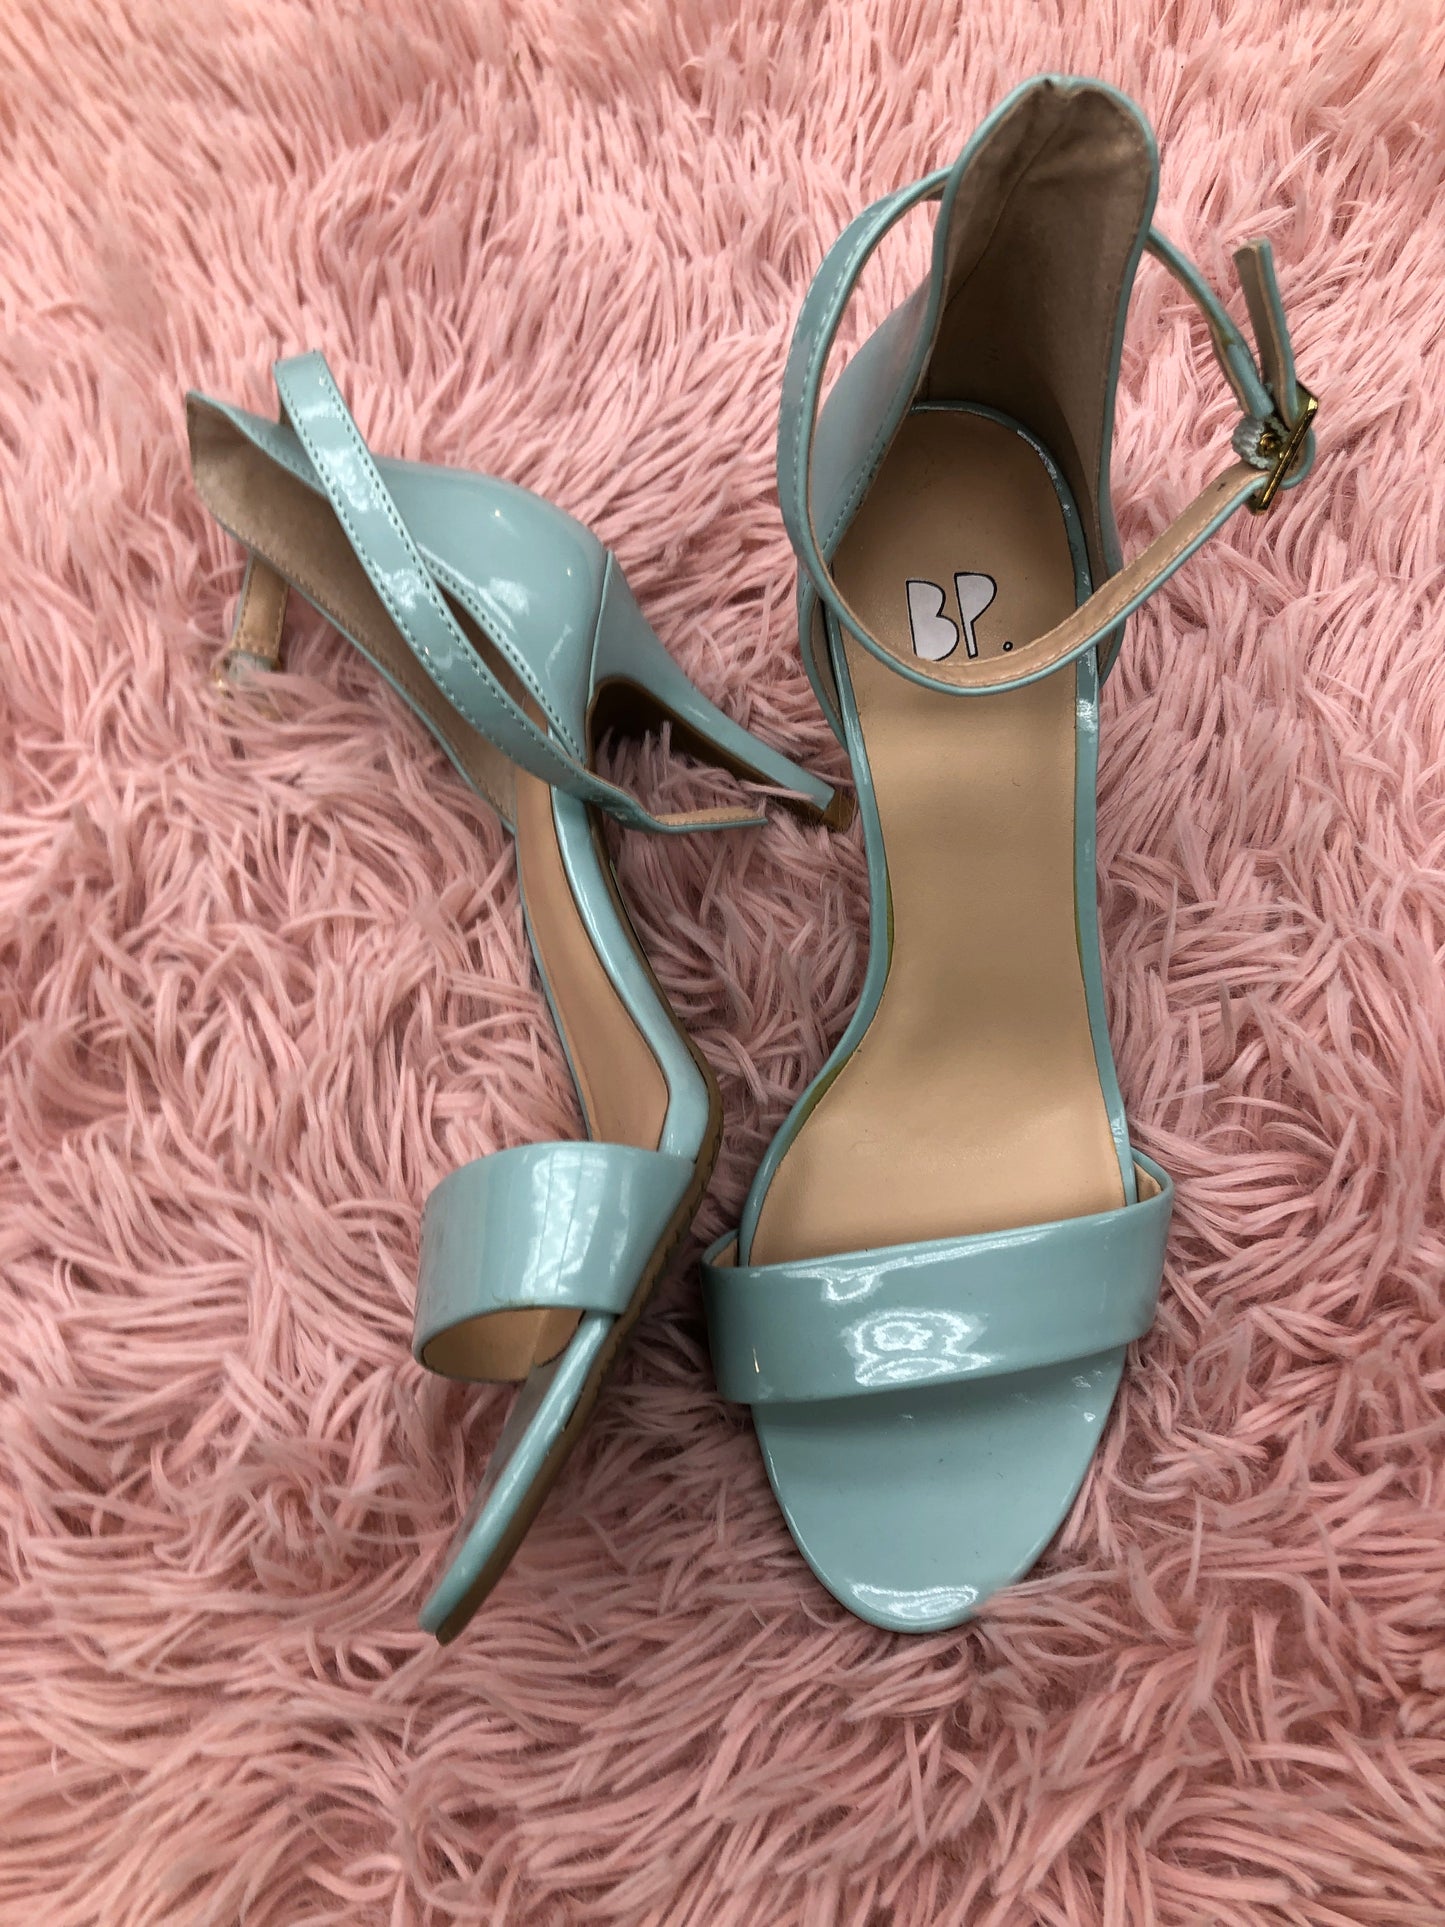 Shoes Heels Stiletto By Bp  Size: 6